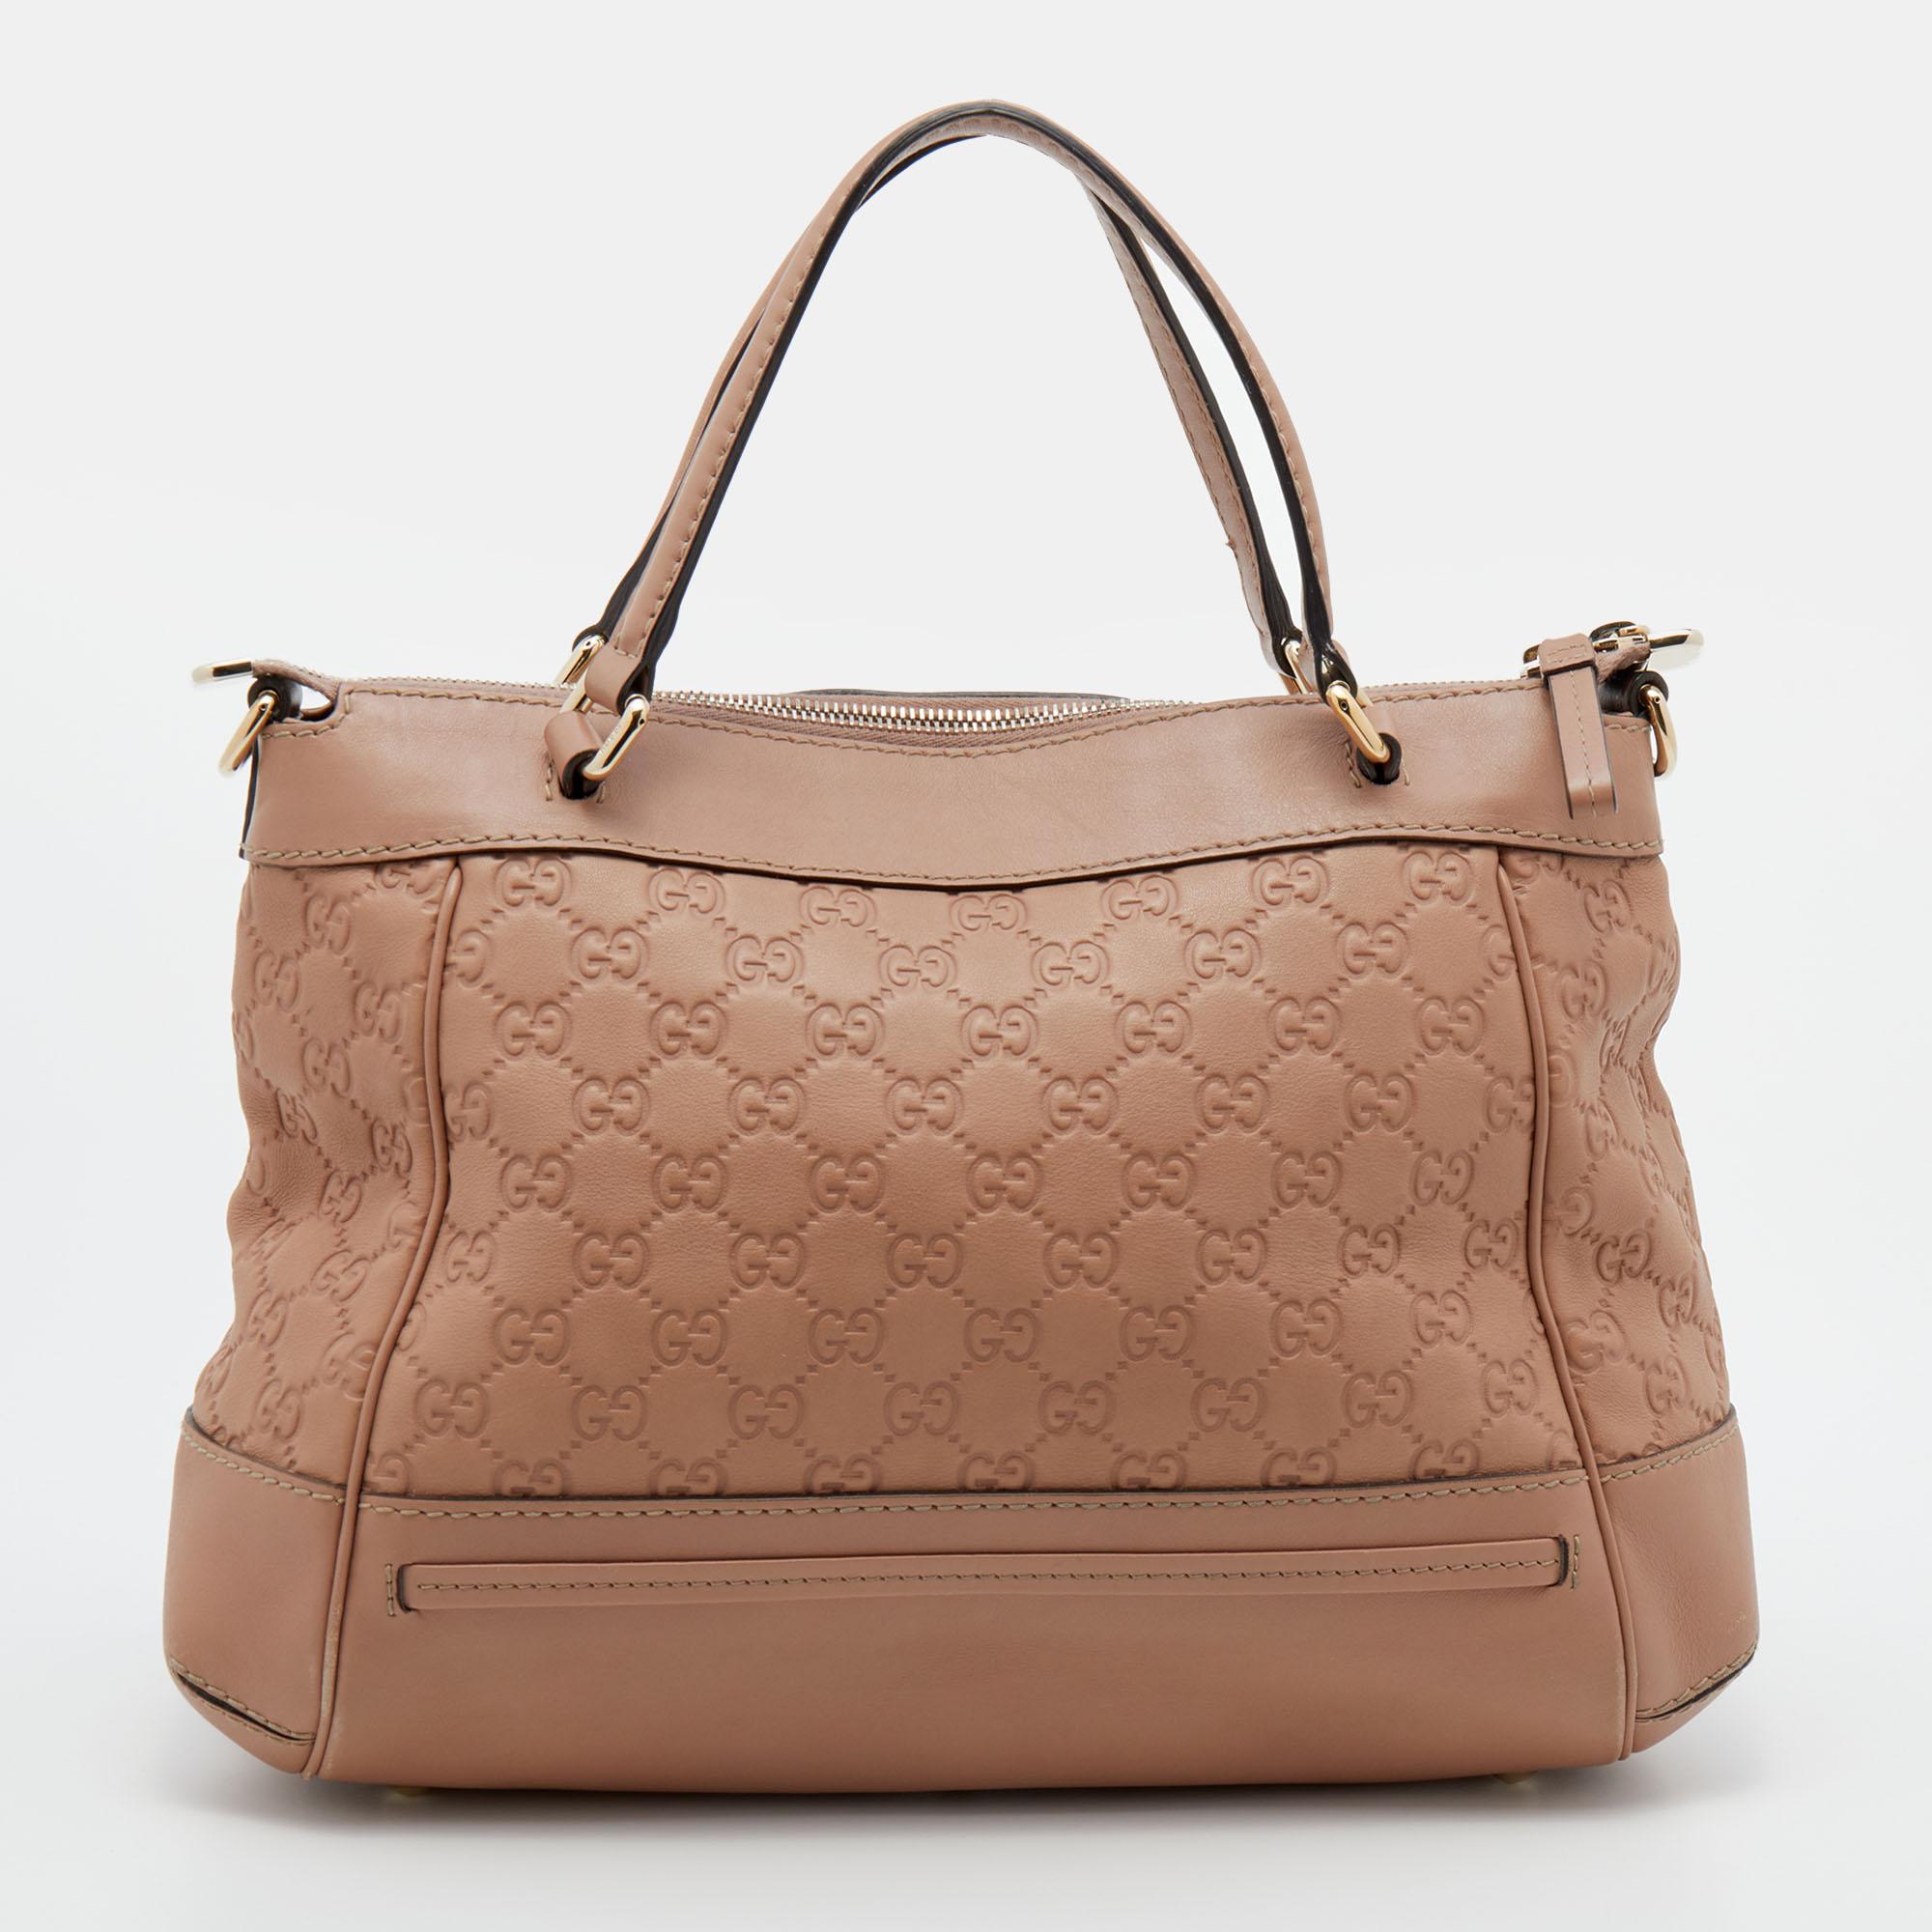 This designer tote from the House of Gucci is super classy and functional, perfect for everyday use. It is made from Guccissima leather on the exterior with a bow accent adorning the front. It has two handles and a bag strap.

Includes: Original